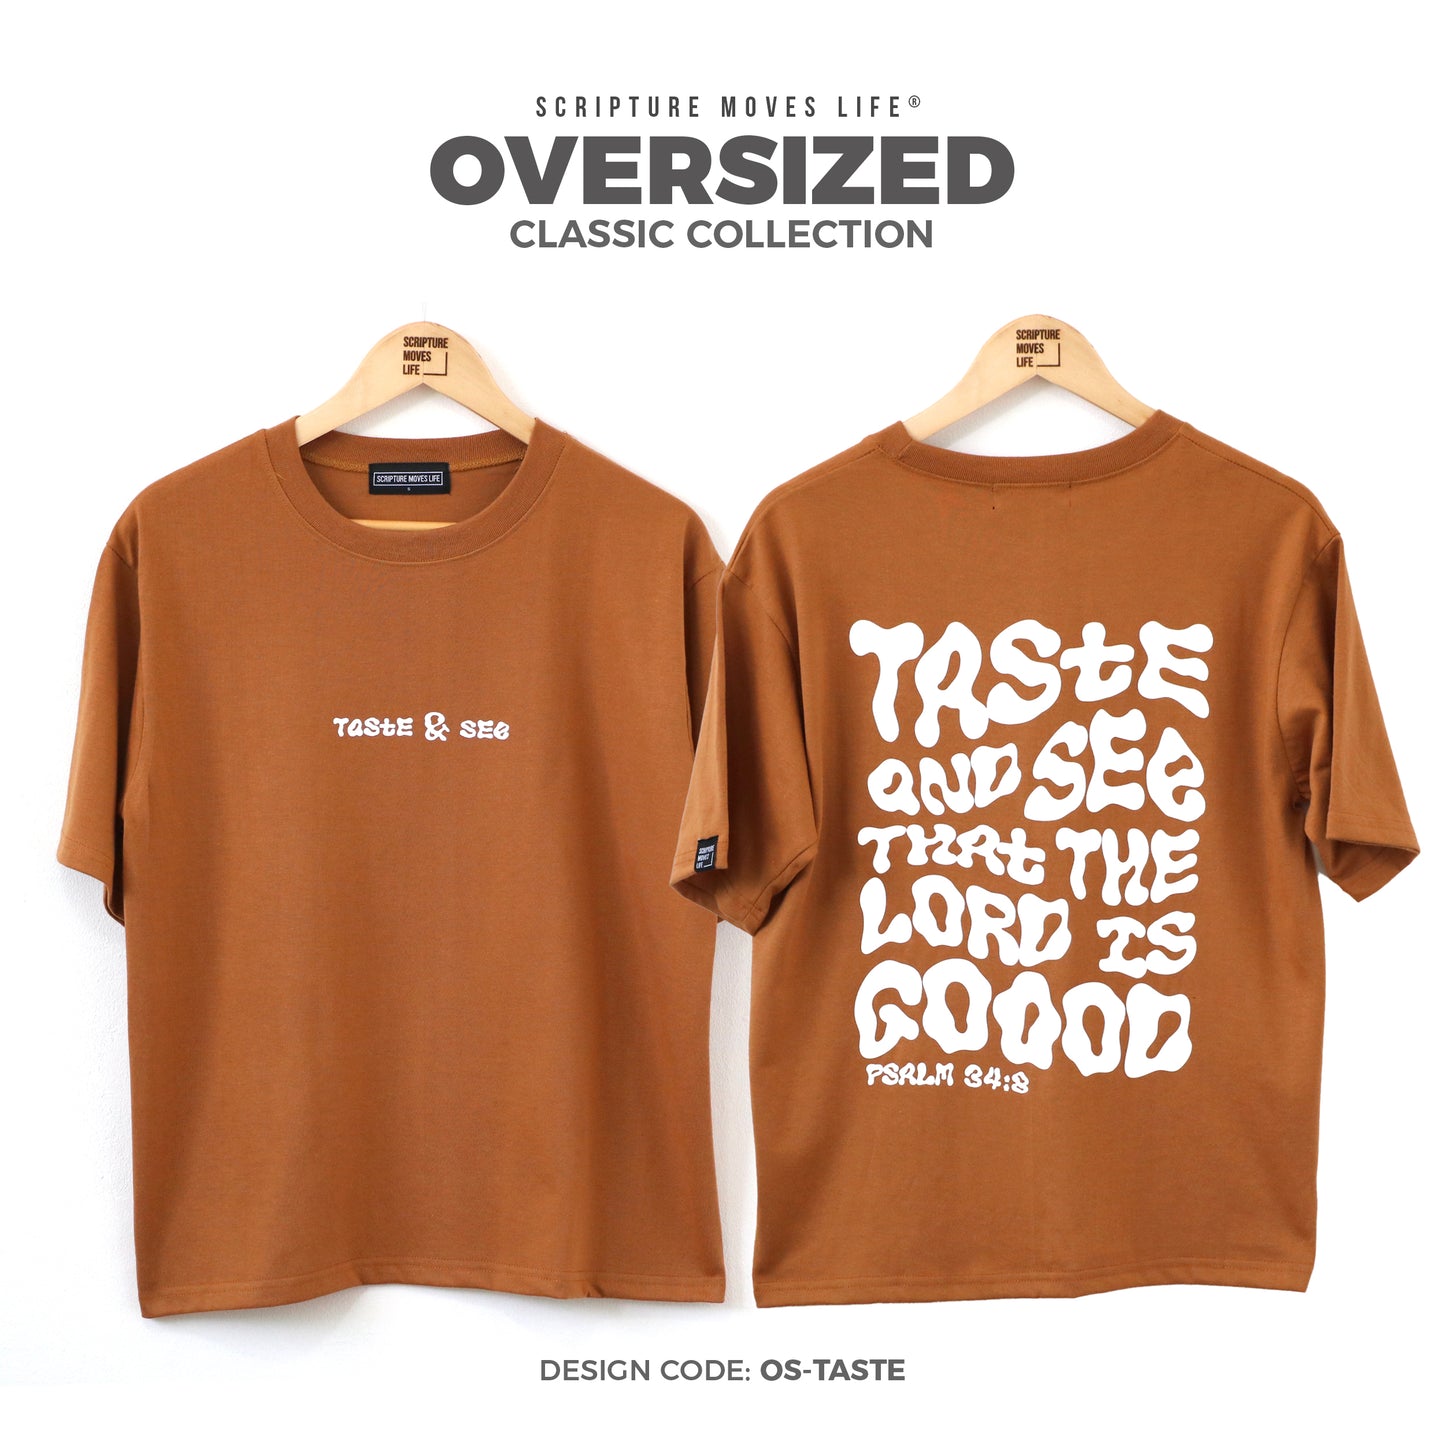 Oversized-Taste and see that the Lord is good